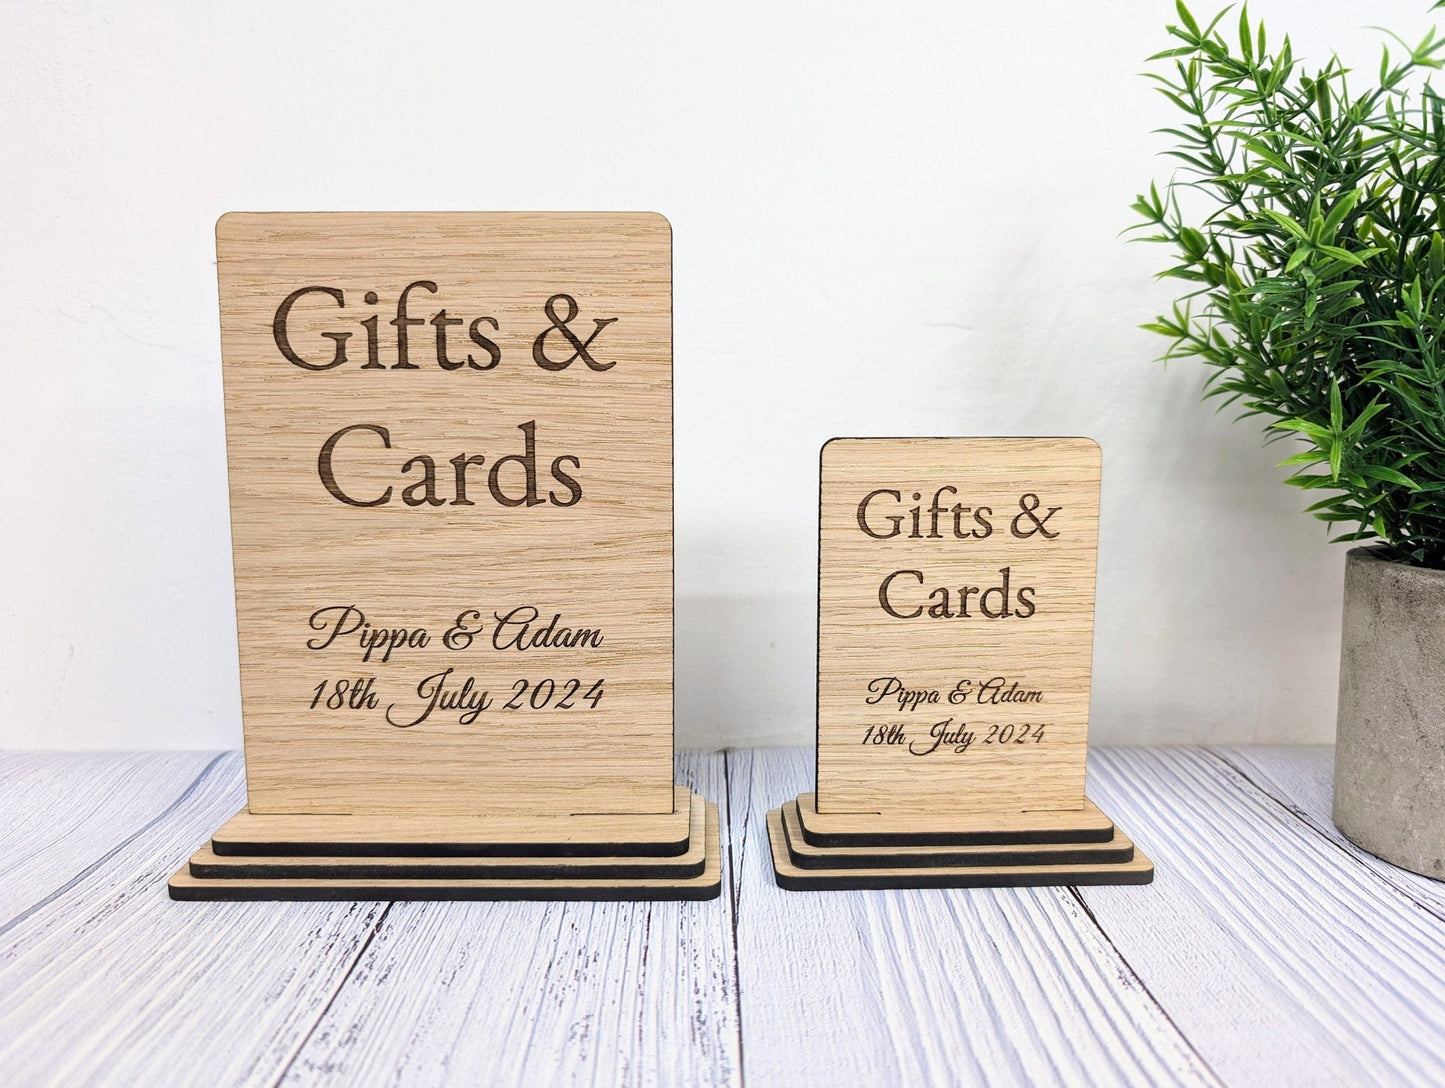 Personalised 'Gifts & Cards' Wooden Sign for Weddings and Parties - Eco-Friendly Freestanding Display with Couple's Name and Date - CherryGroveCraft